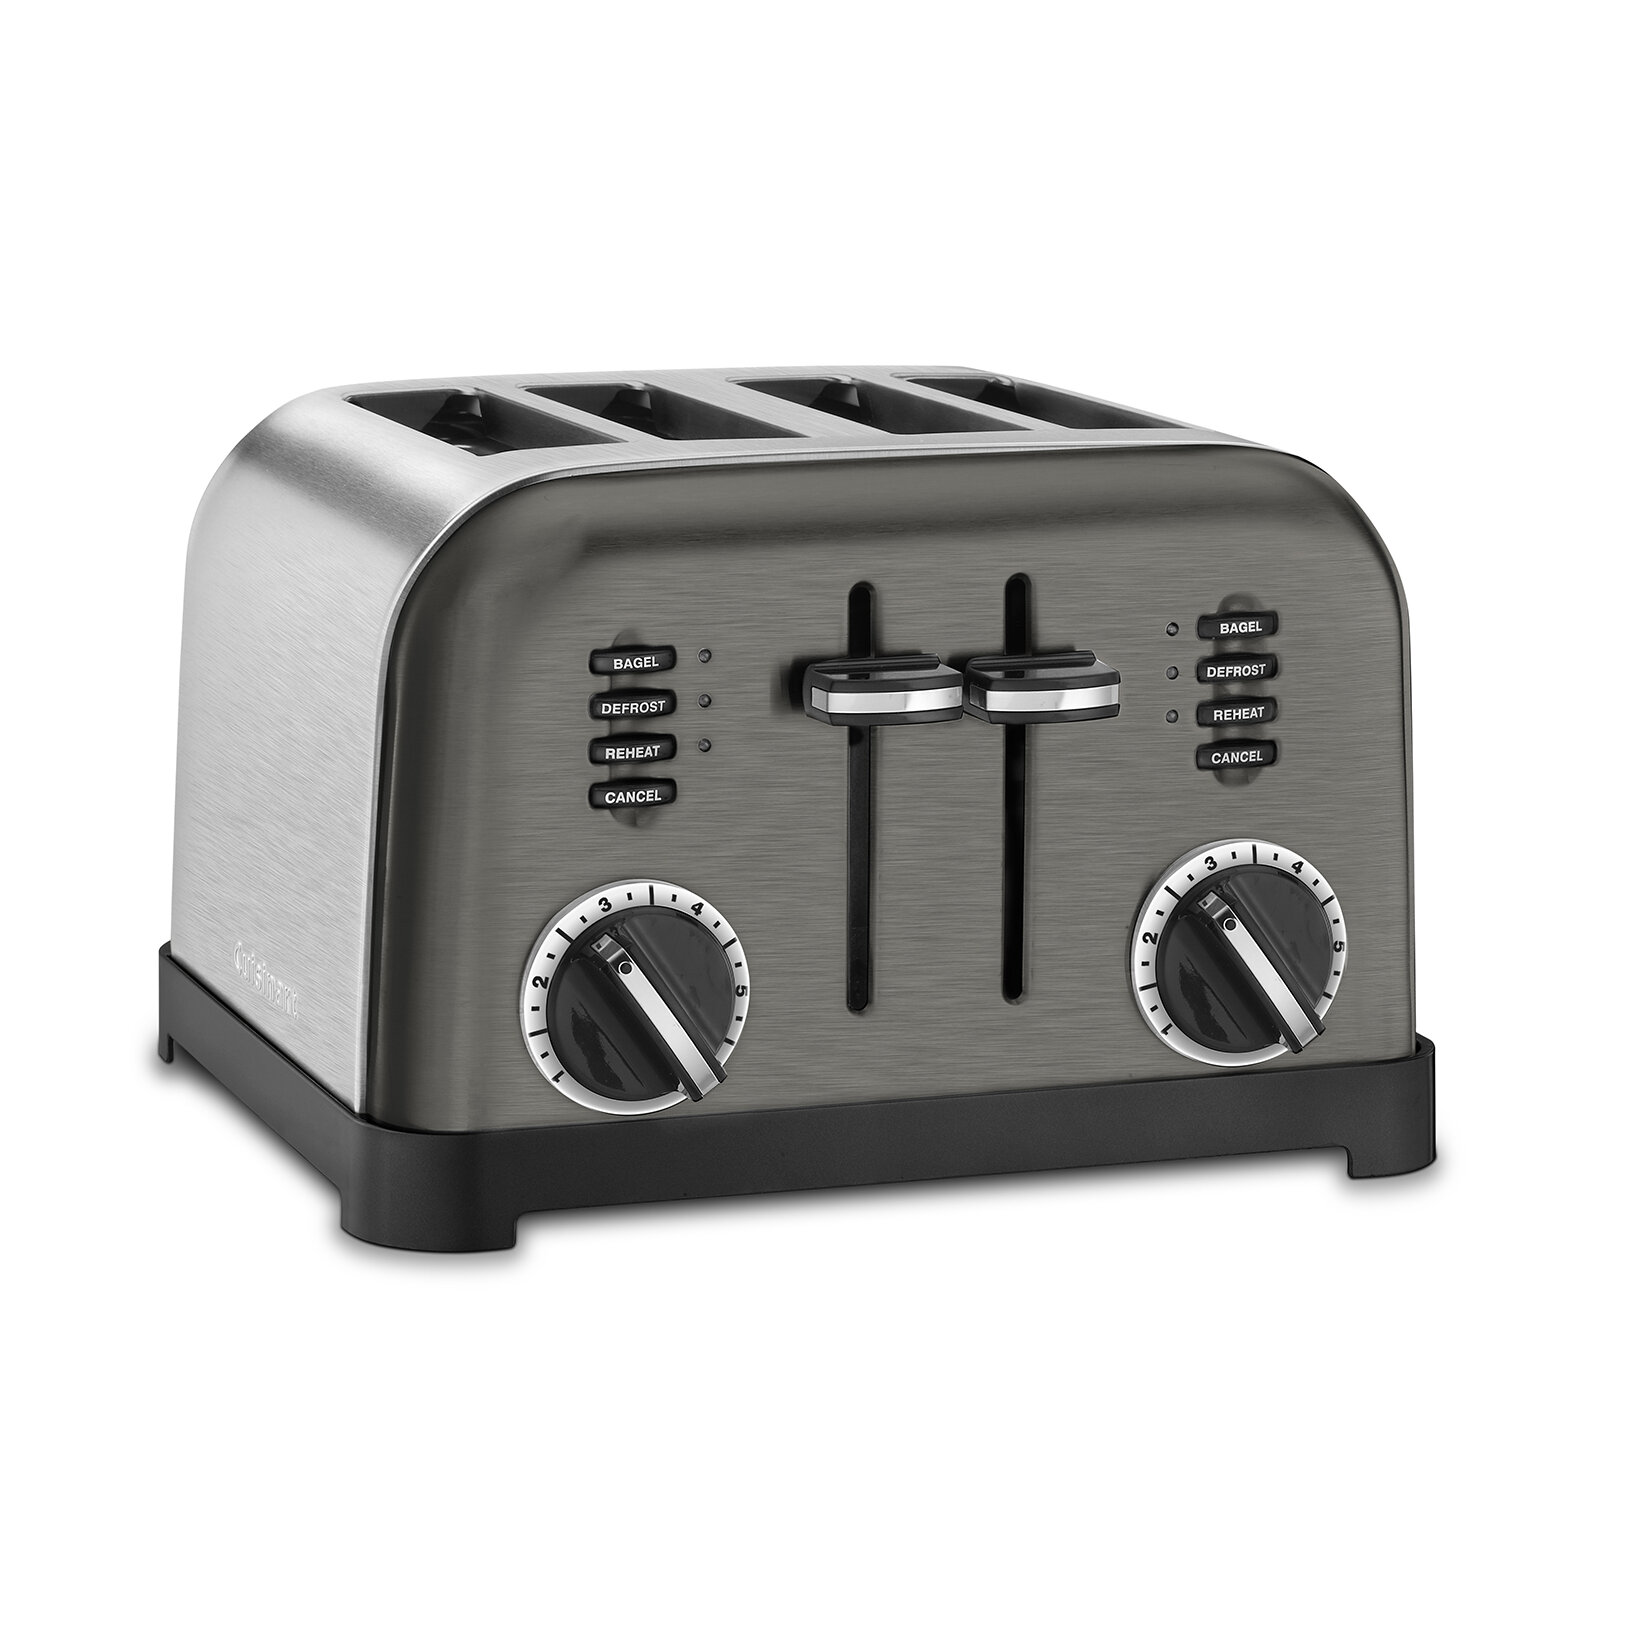 Cuisinart - 4-Slice Metal Classic Toaster (Black Stainless)